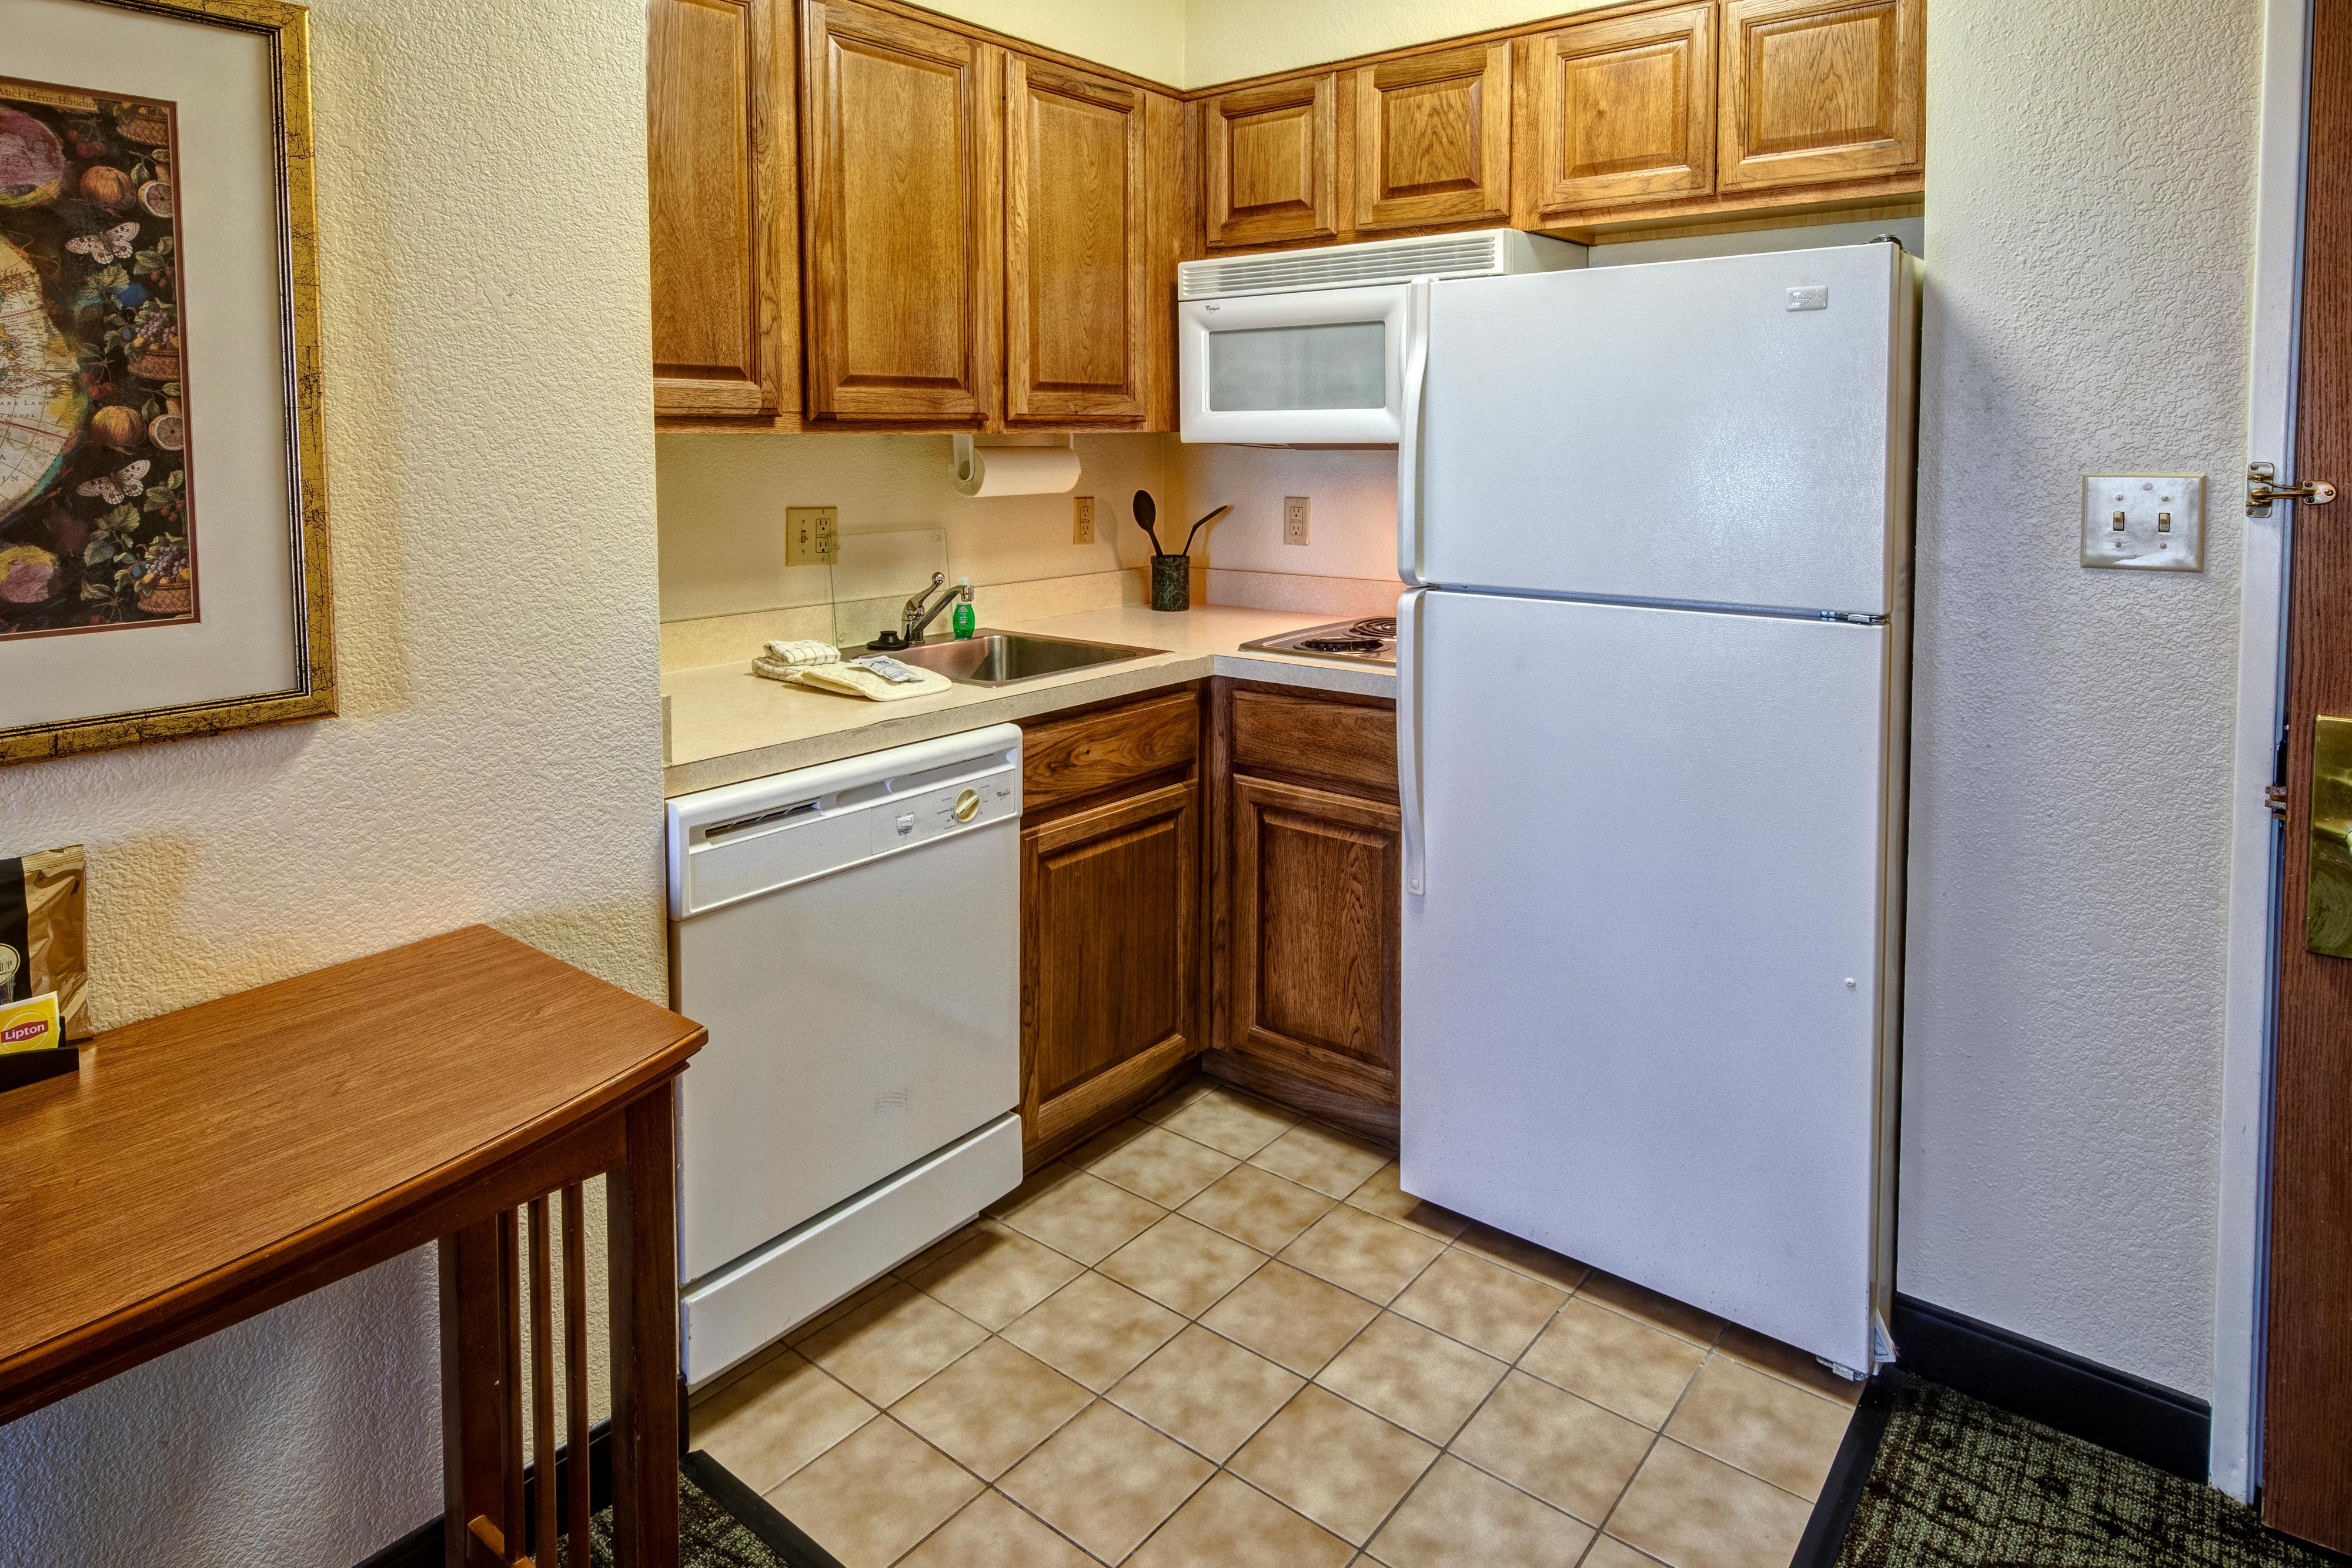 Make yourself at home with a fully-equipped kitchen in your suite featuring a two-burner cooktop stove, microwave, refrigerator, and dishwasher. 